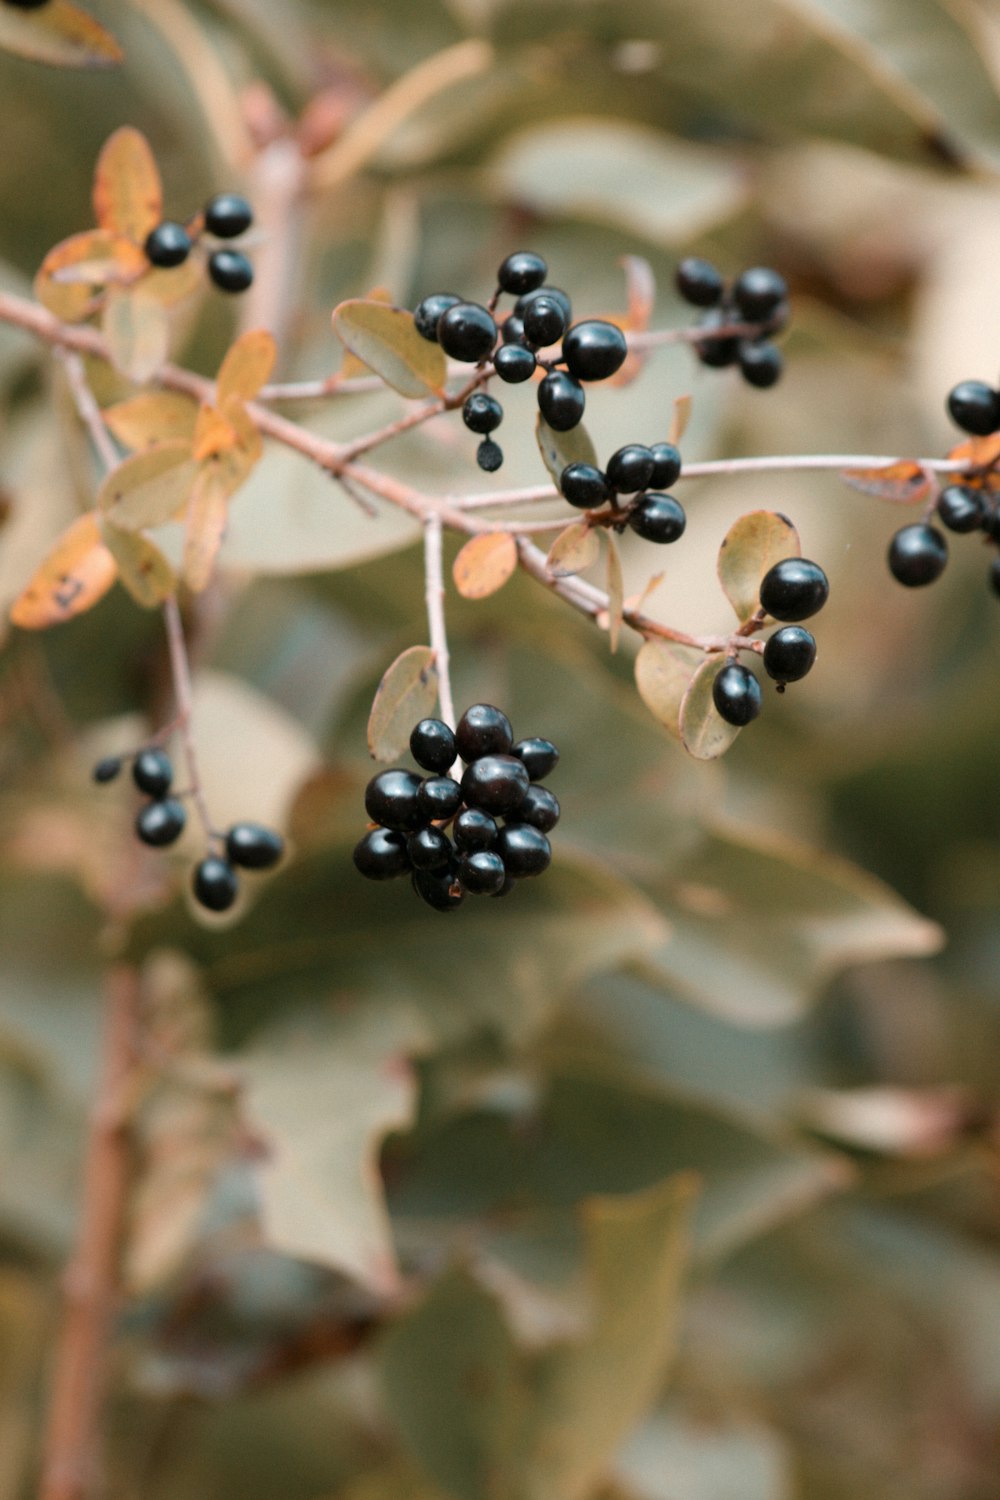 black and brown round fruits